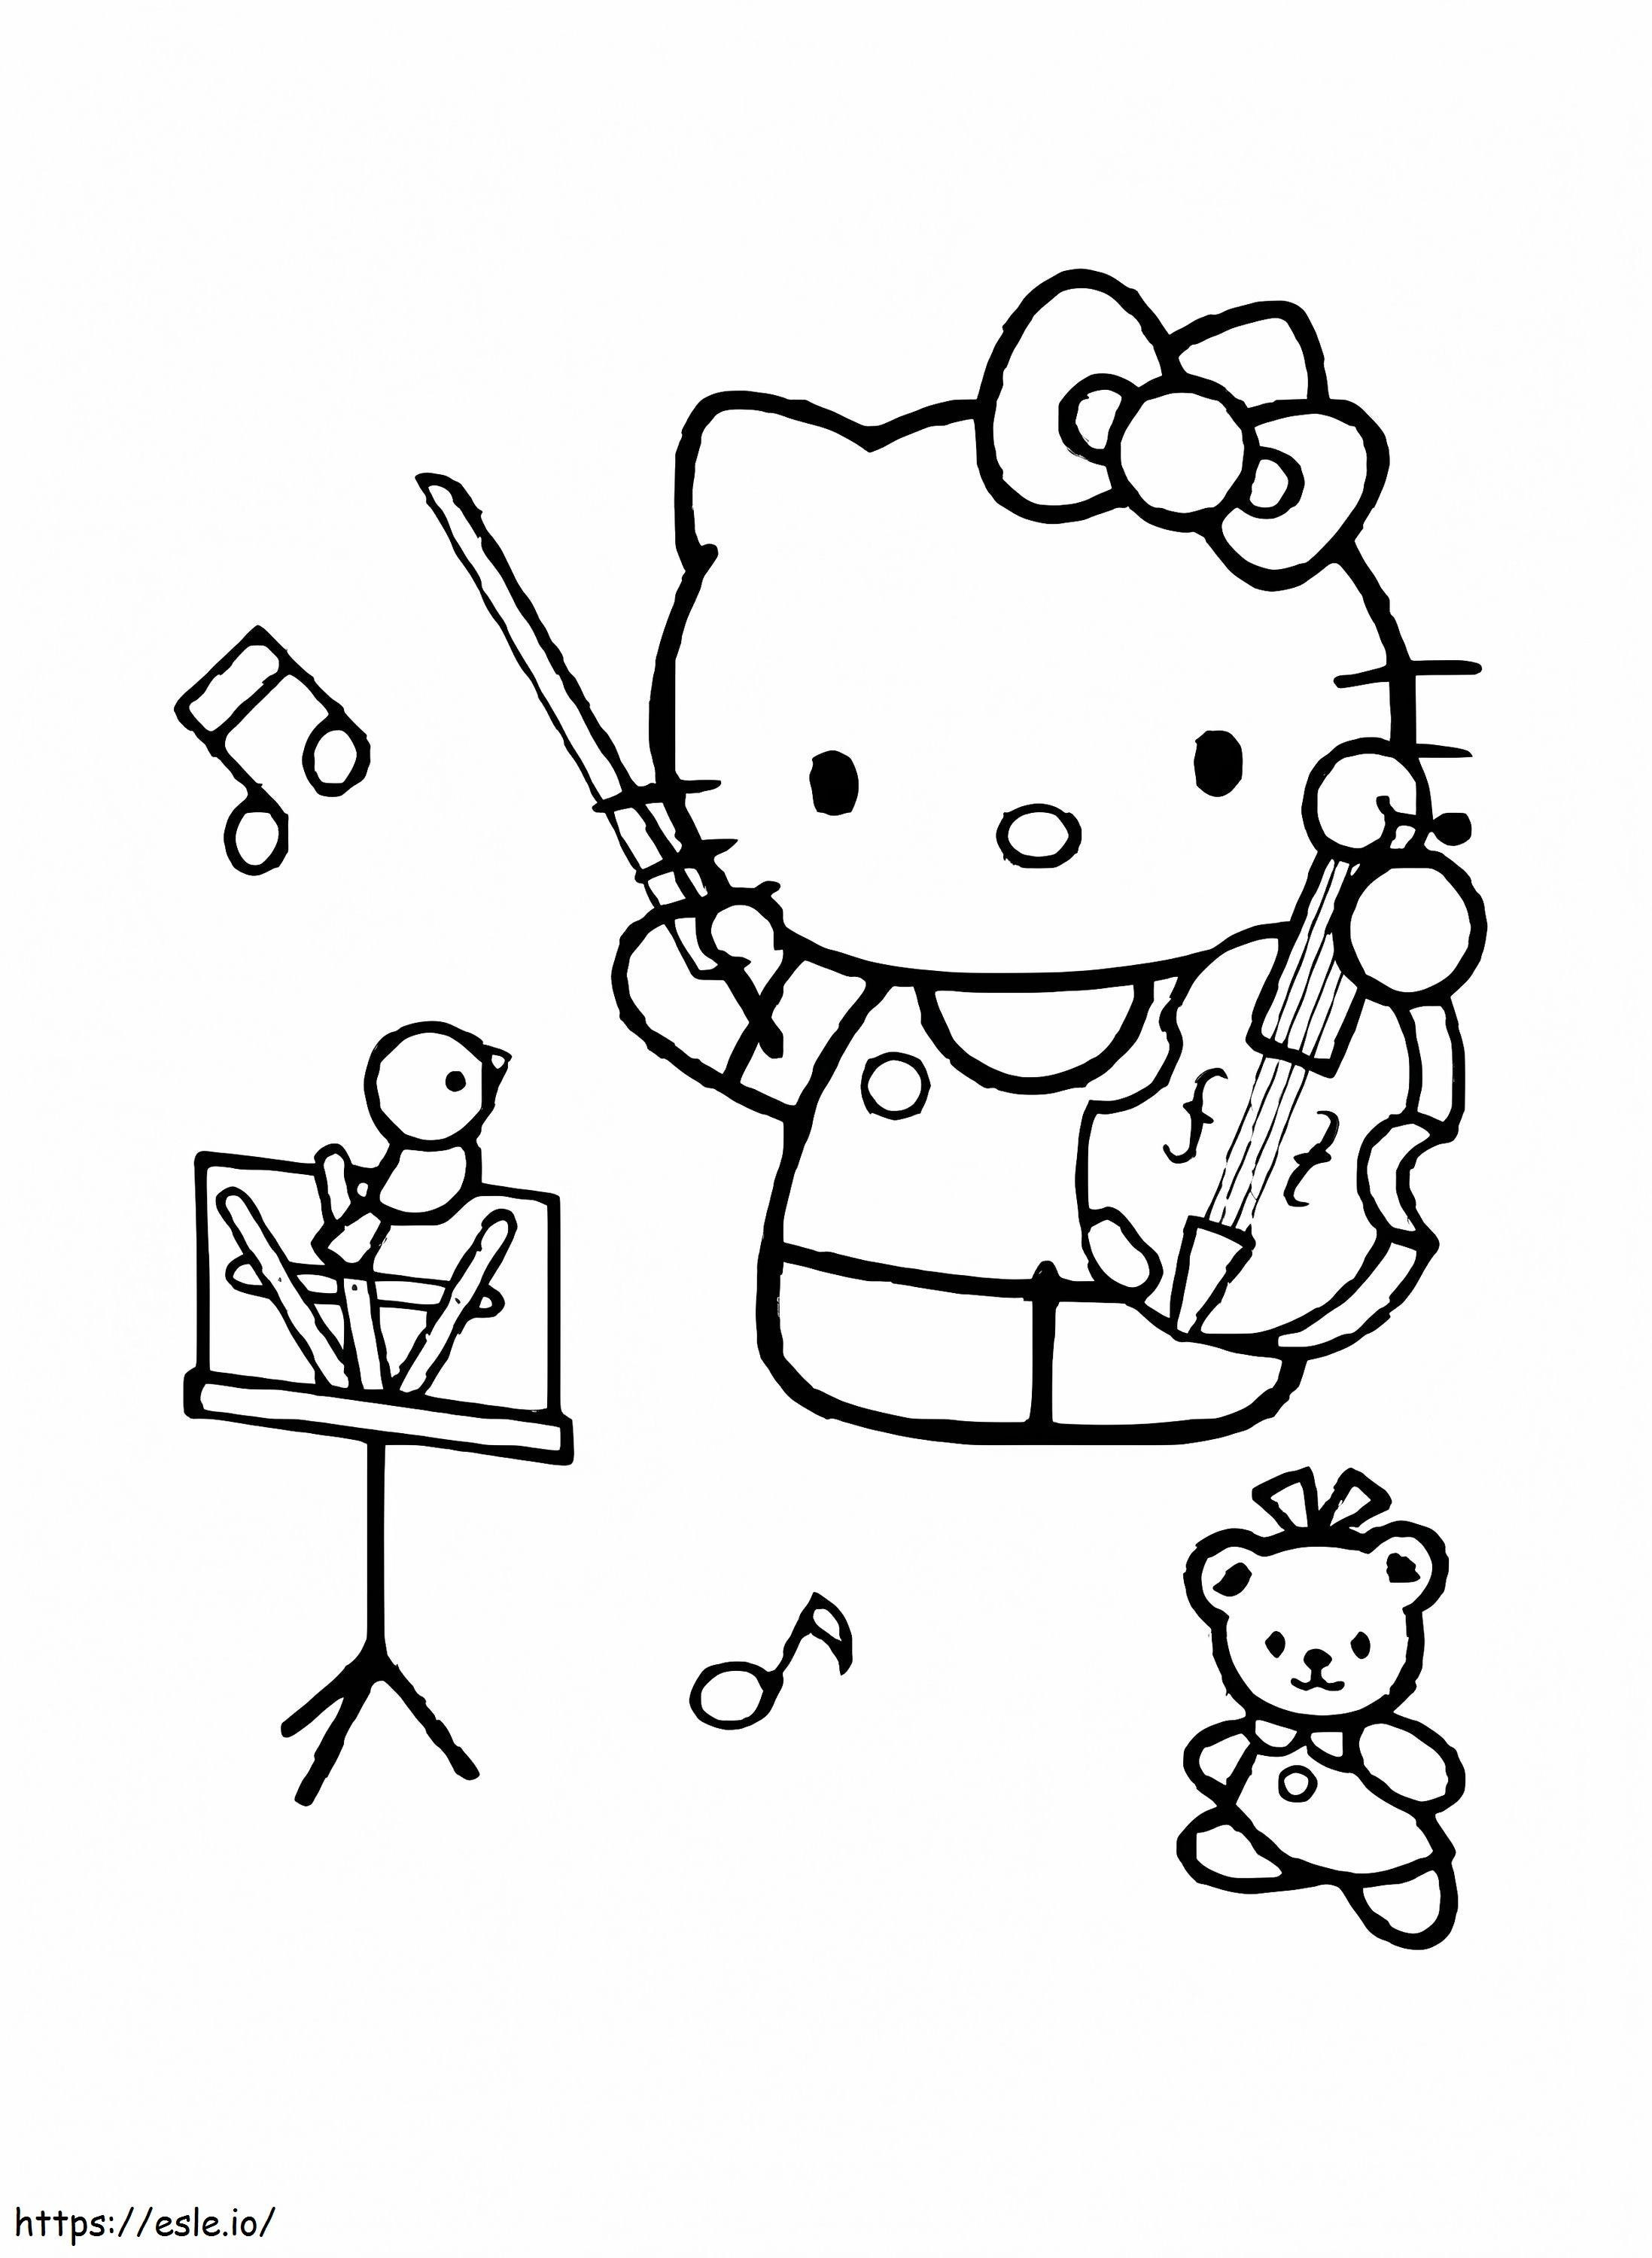 Hello Kitty Playing The Violin coloring page